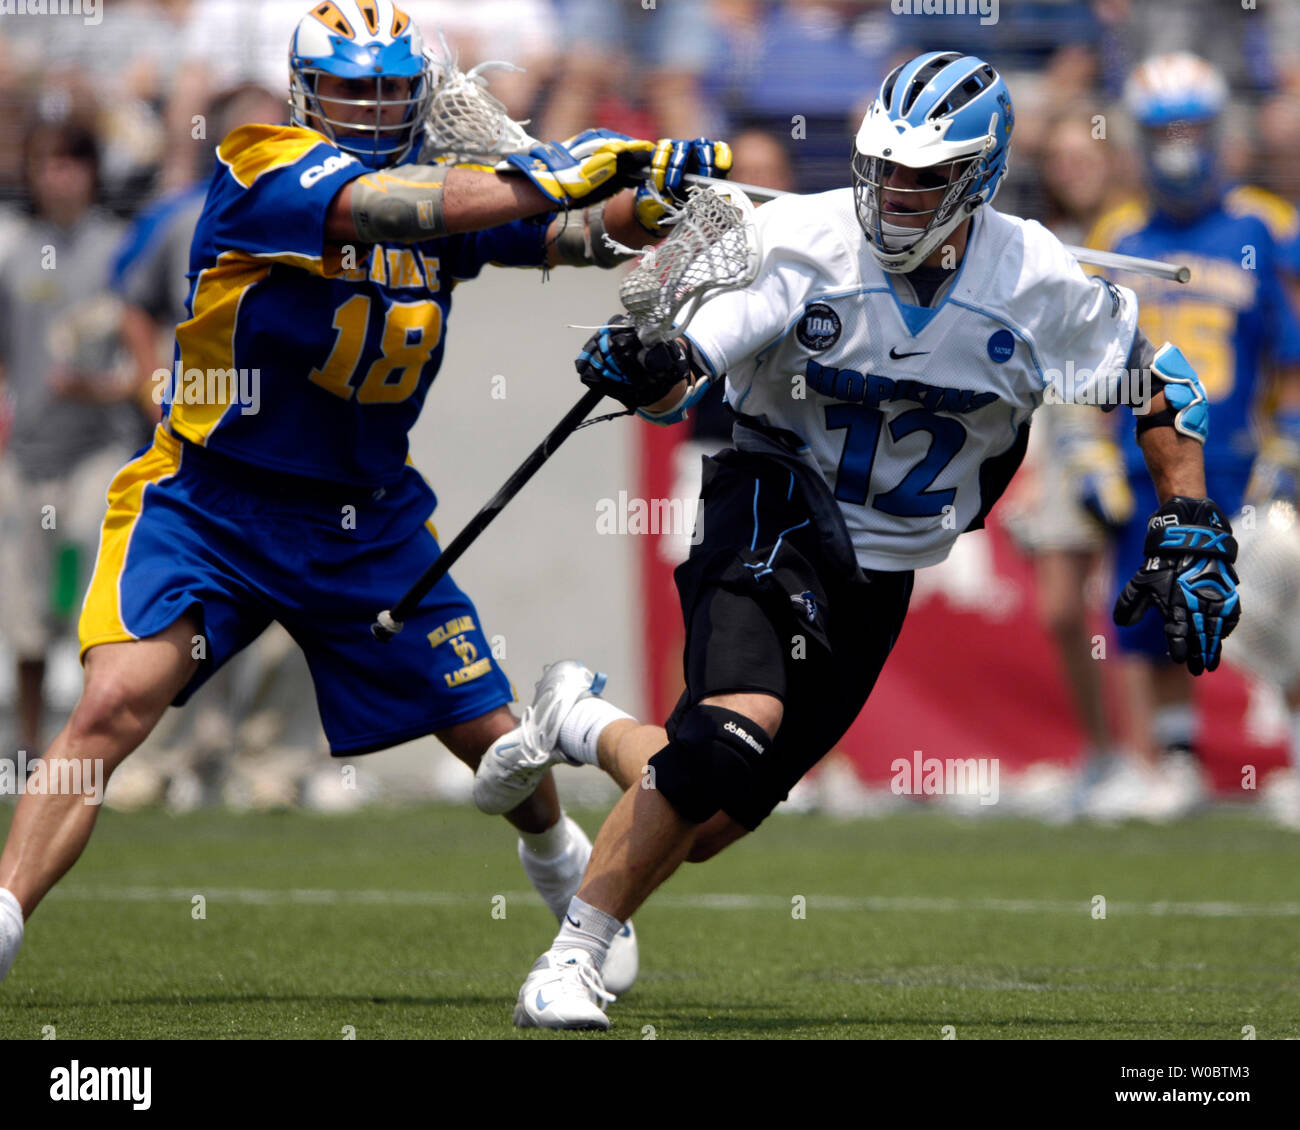 Johns Hopkins University Blue Jays Stephen Peyser (12) works to the net in the third quarter against Delaware Blue Hens Rob Smith (18) in the semi-final of the NCAA Division I lacrosse championship at M&T Bank Stadium in Baltimore, Maryland on May 26, 2007.   Johns Hopkins defeated Delaware 8-3 to move to the lacrosse championship.   (UPI Photo/ Mark Goldman) Stock Photo